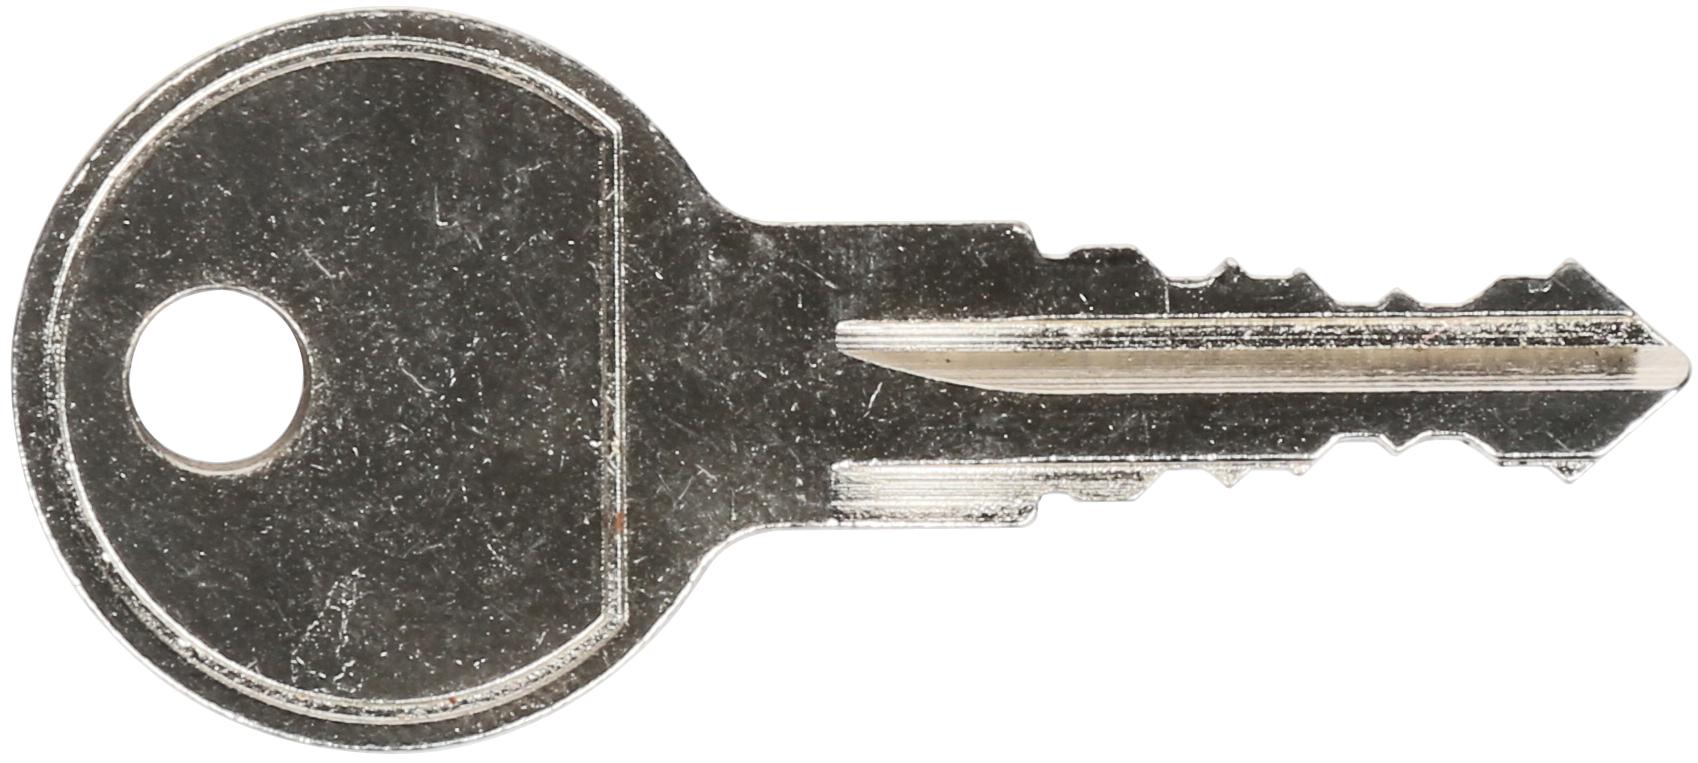 Spare Roof Box Key 133